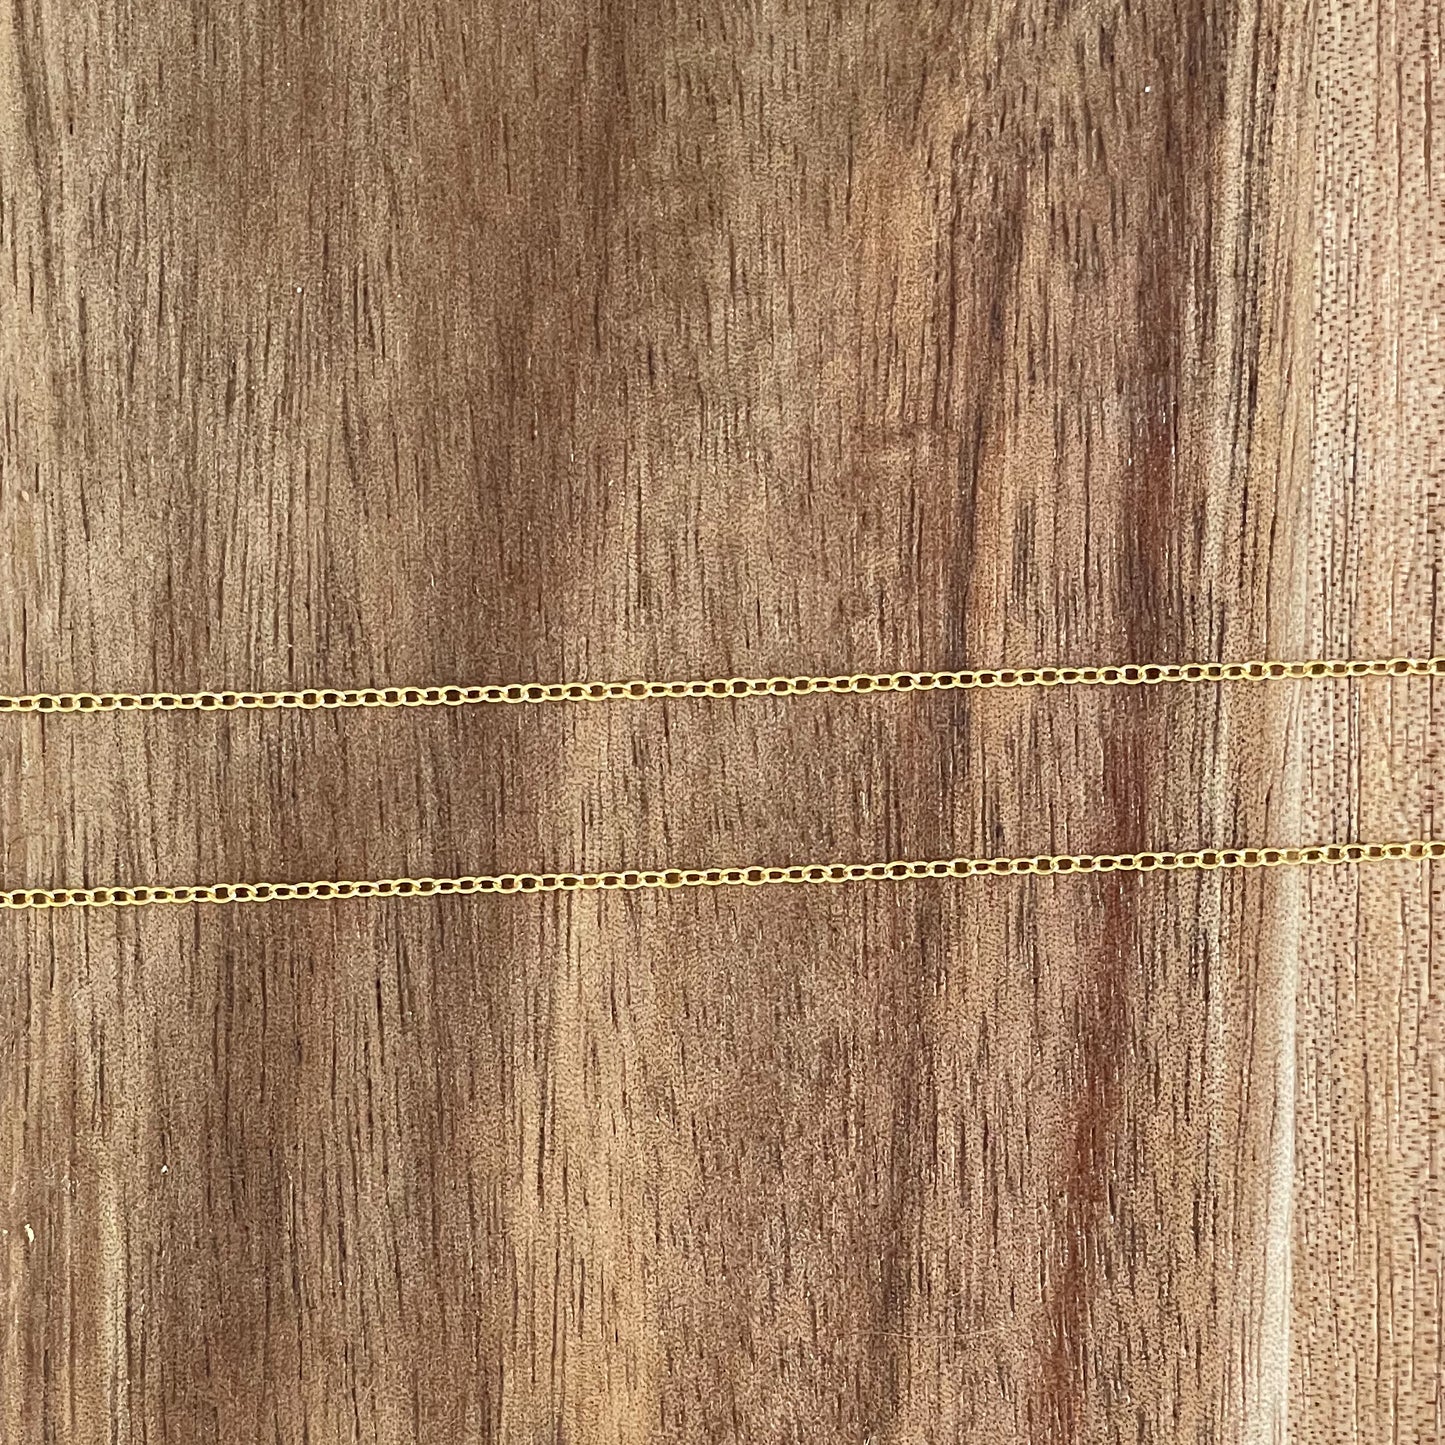 Gold Cable Chain in 3 lengths